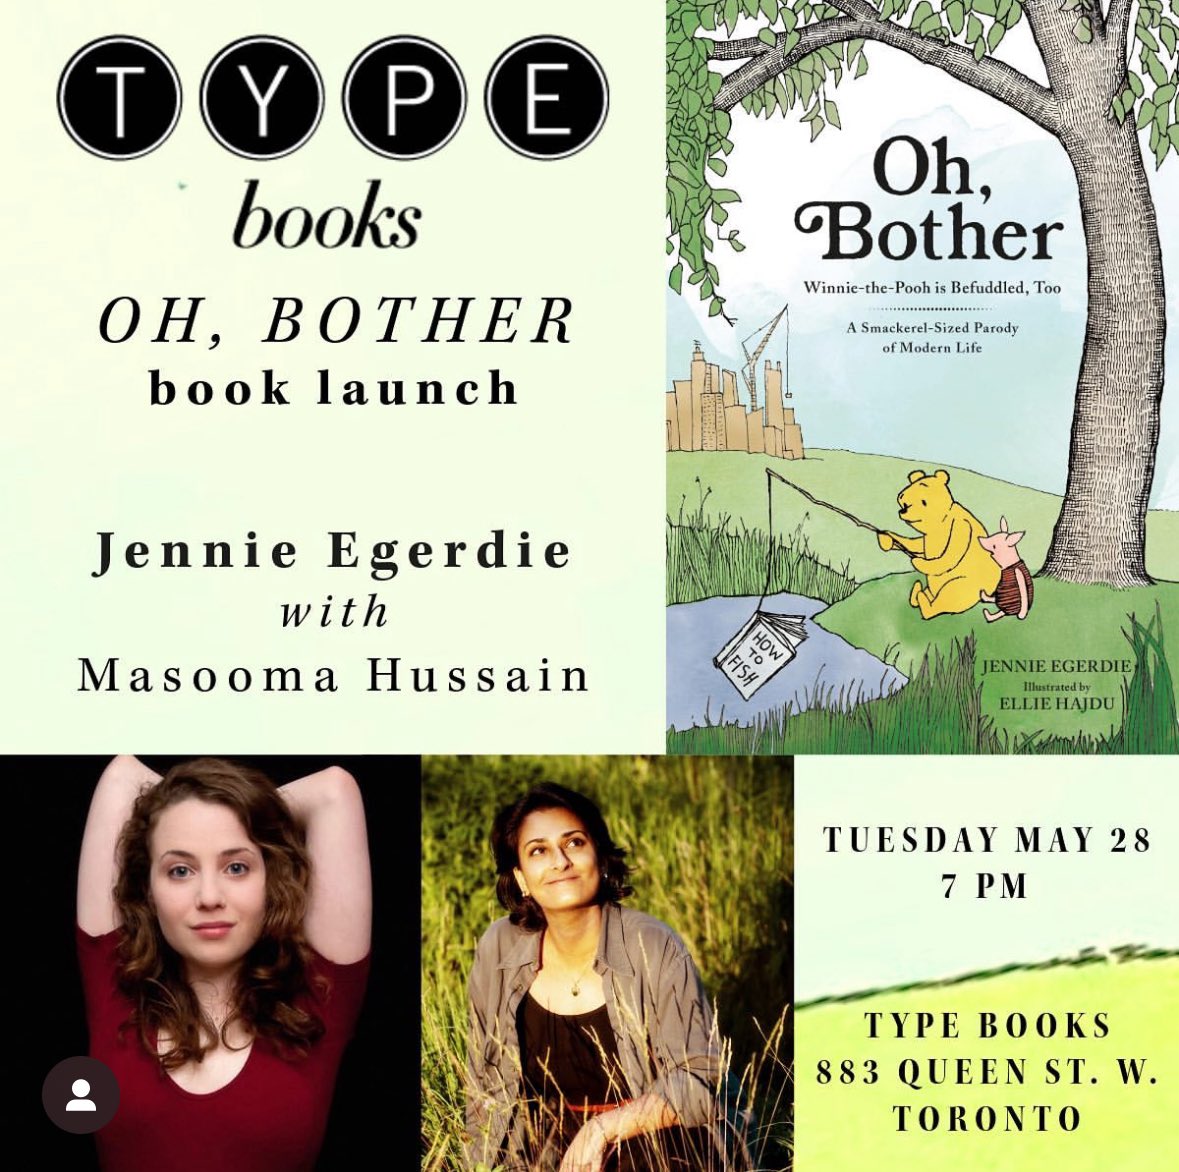 TORONTO FRIENDS! I’ll be at Type Books on Queen in a few weeks! Come hang!